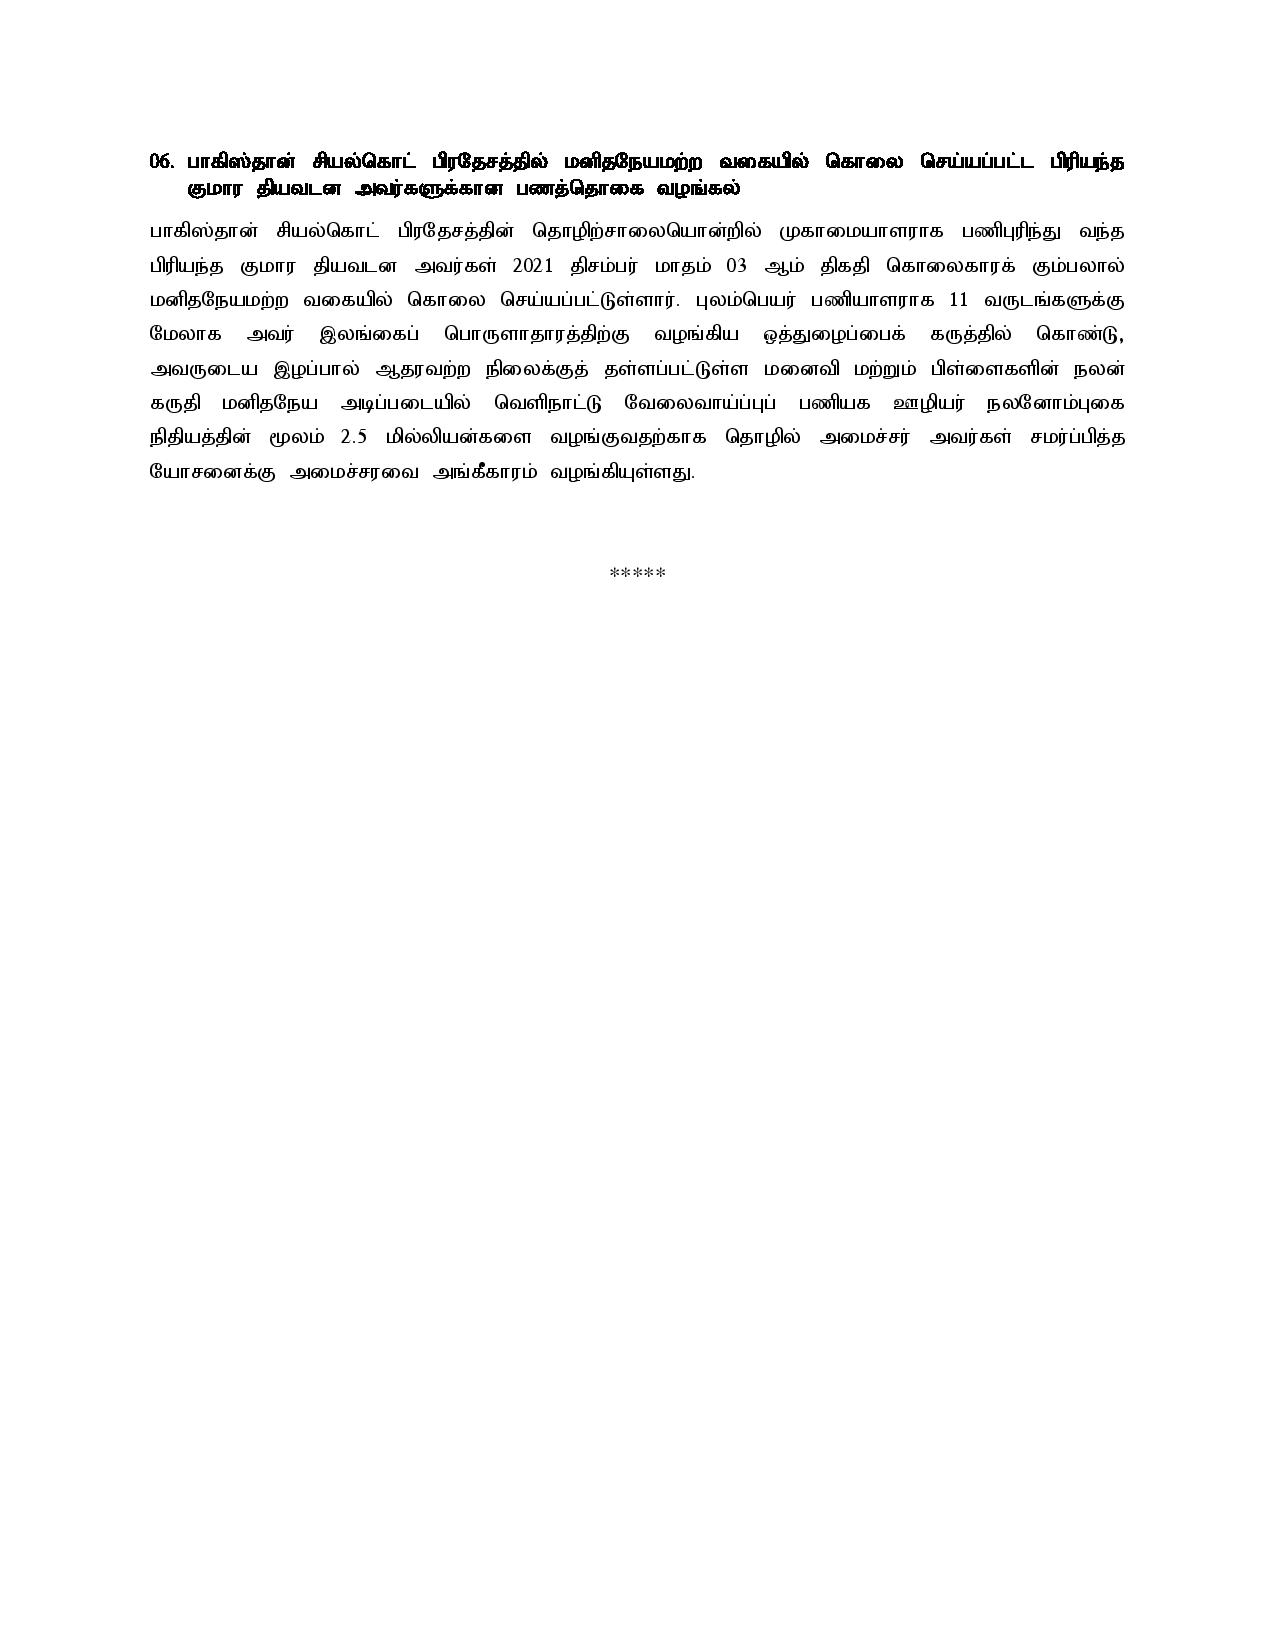 Cabinet Decision on 06.12.2021 Tamil page 003